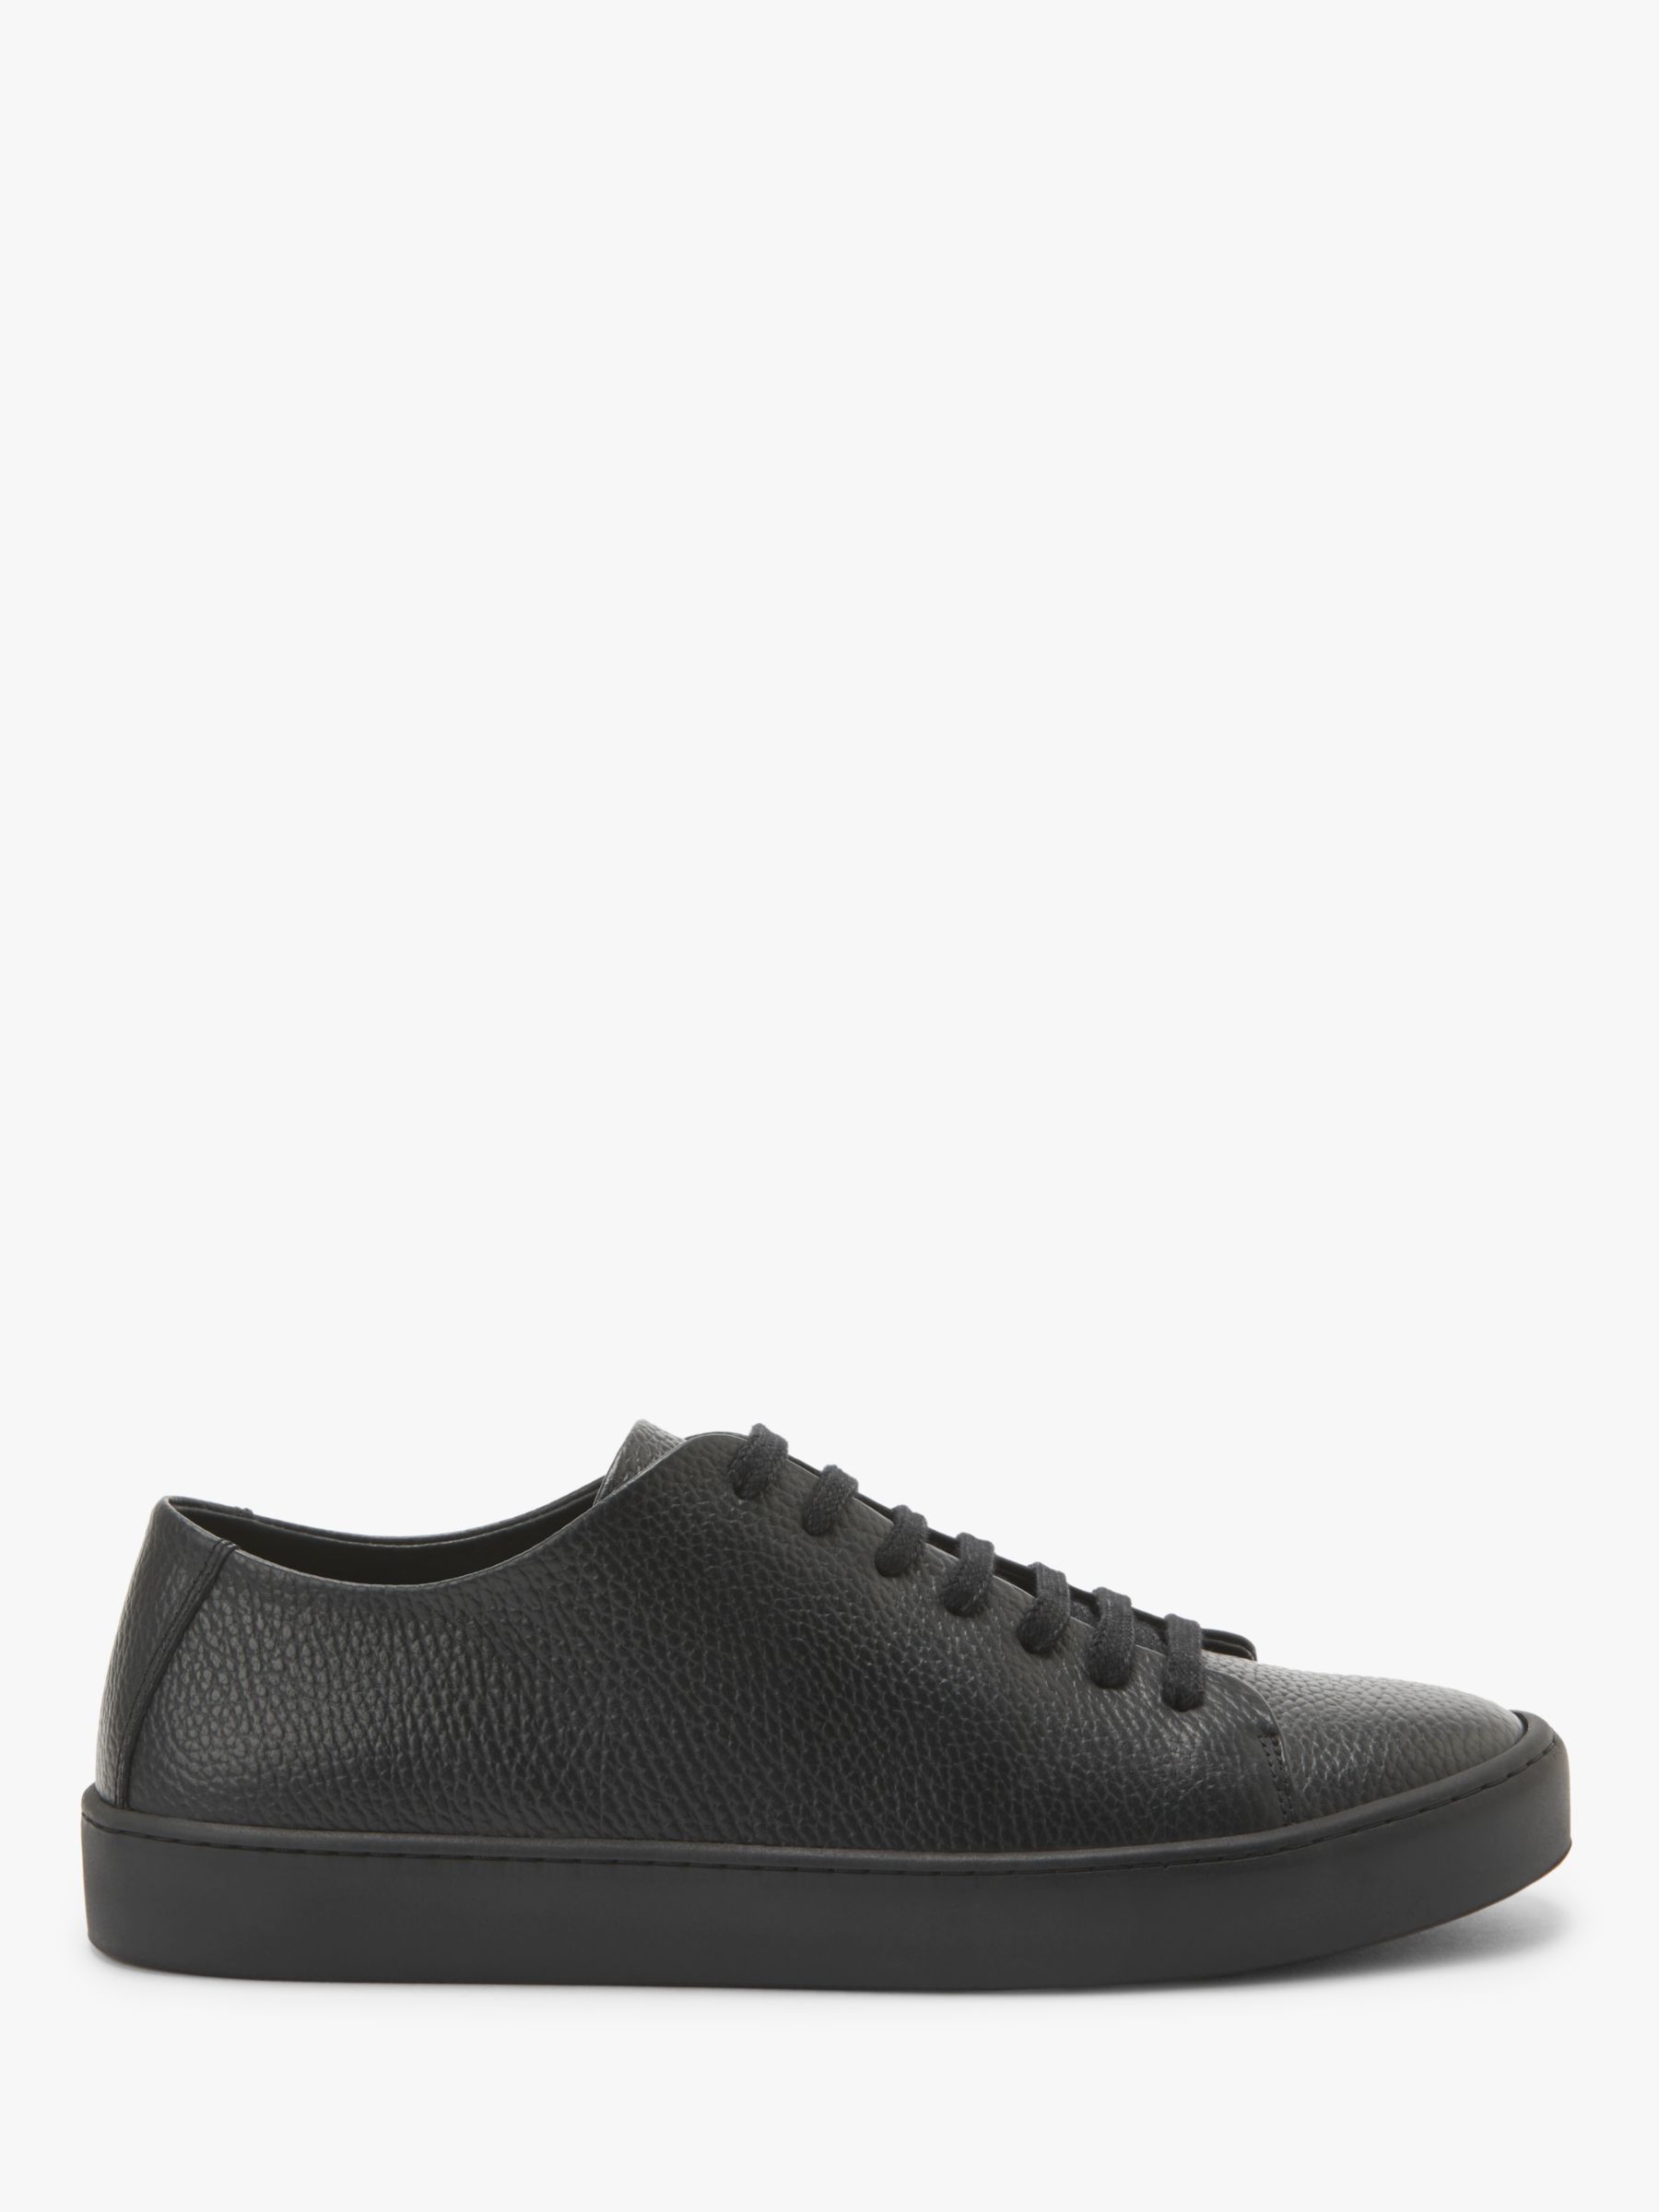 Kin Cupsole Leather Trainers, Black at John Lewis & Partners